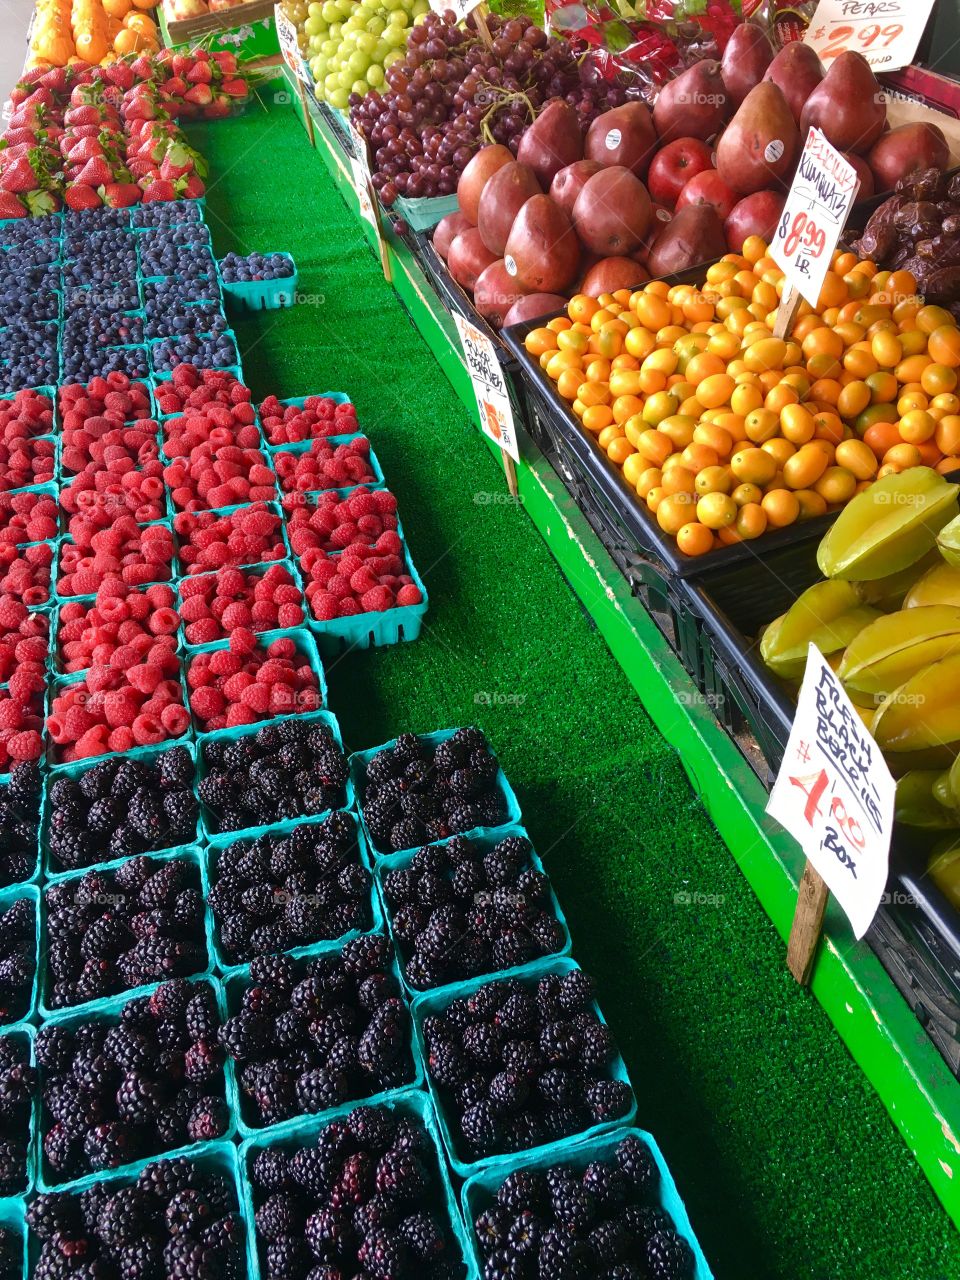 Variety of fruits for sale in market